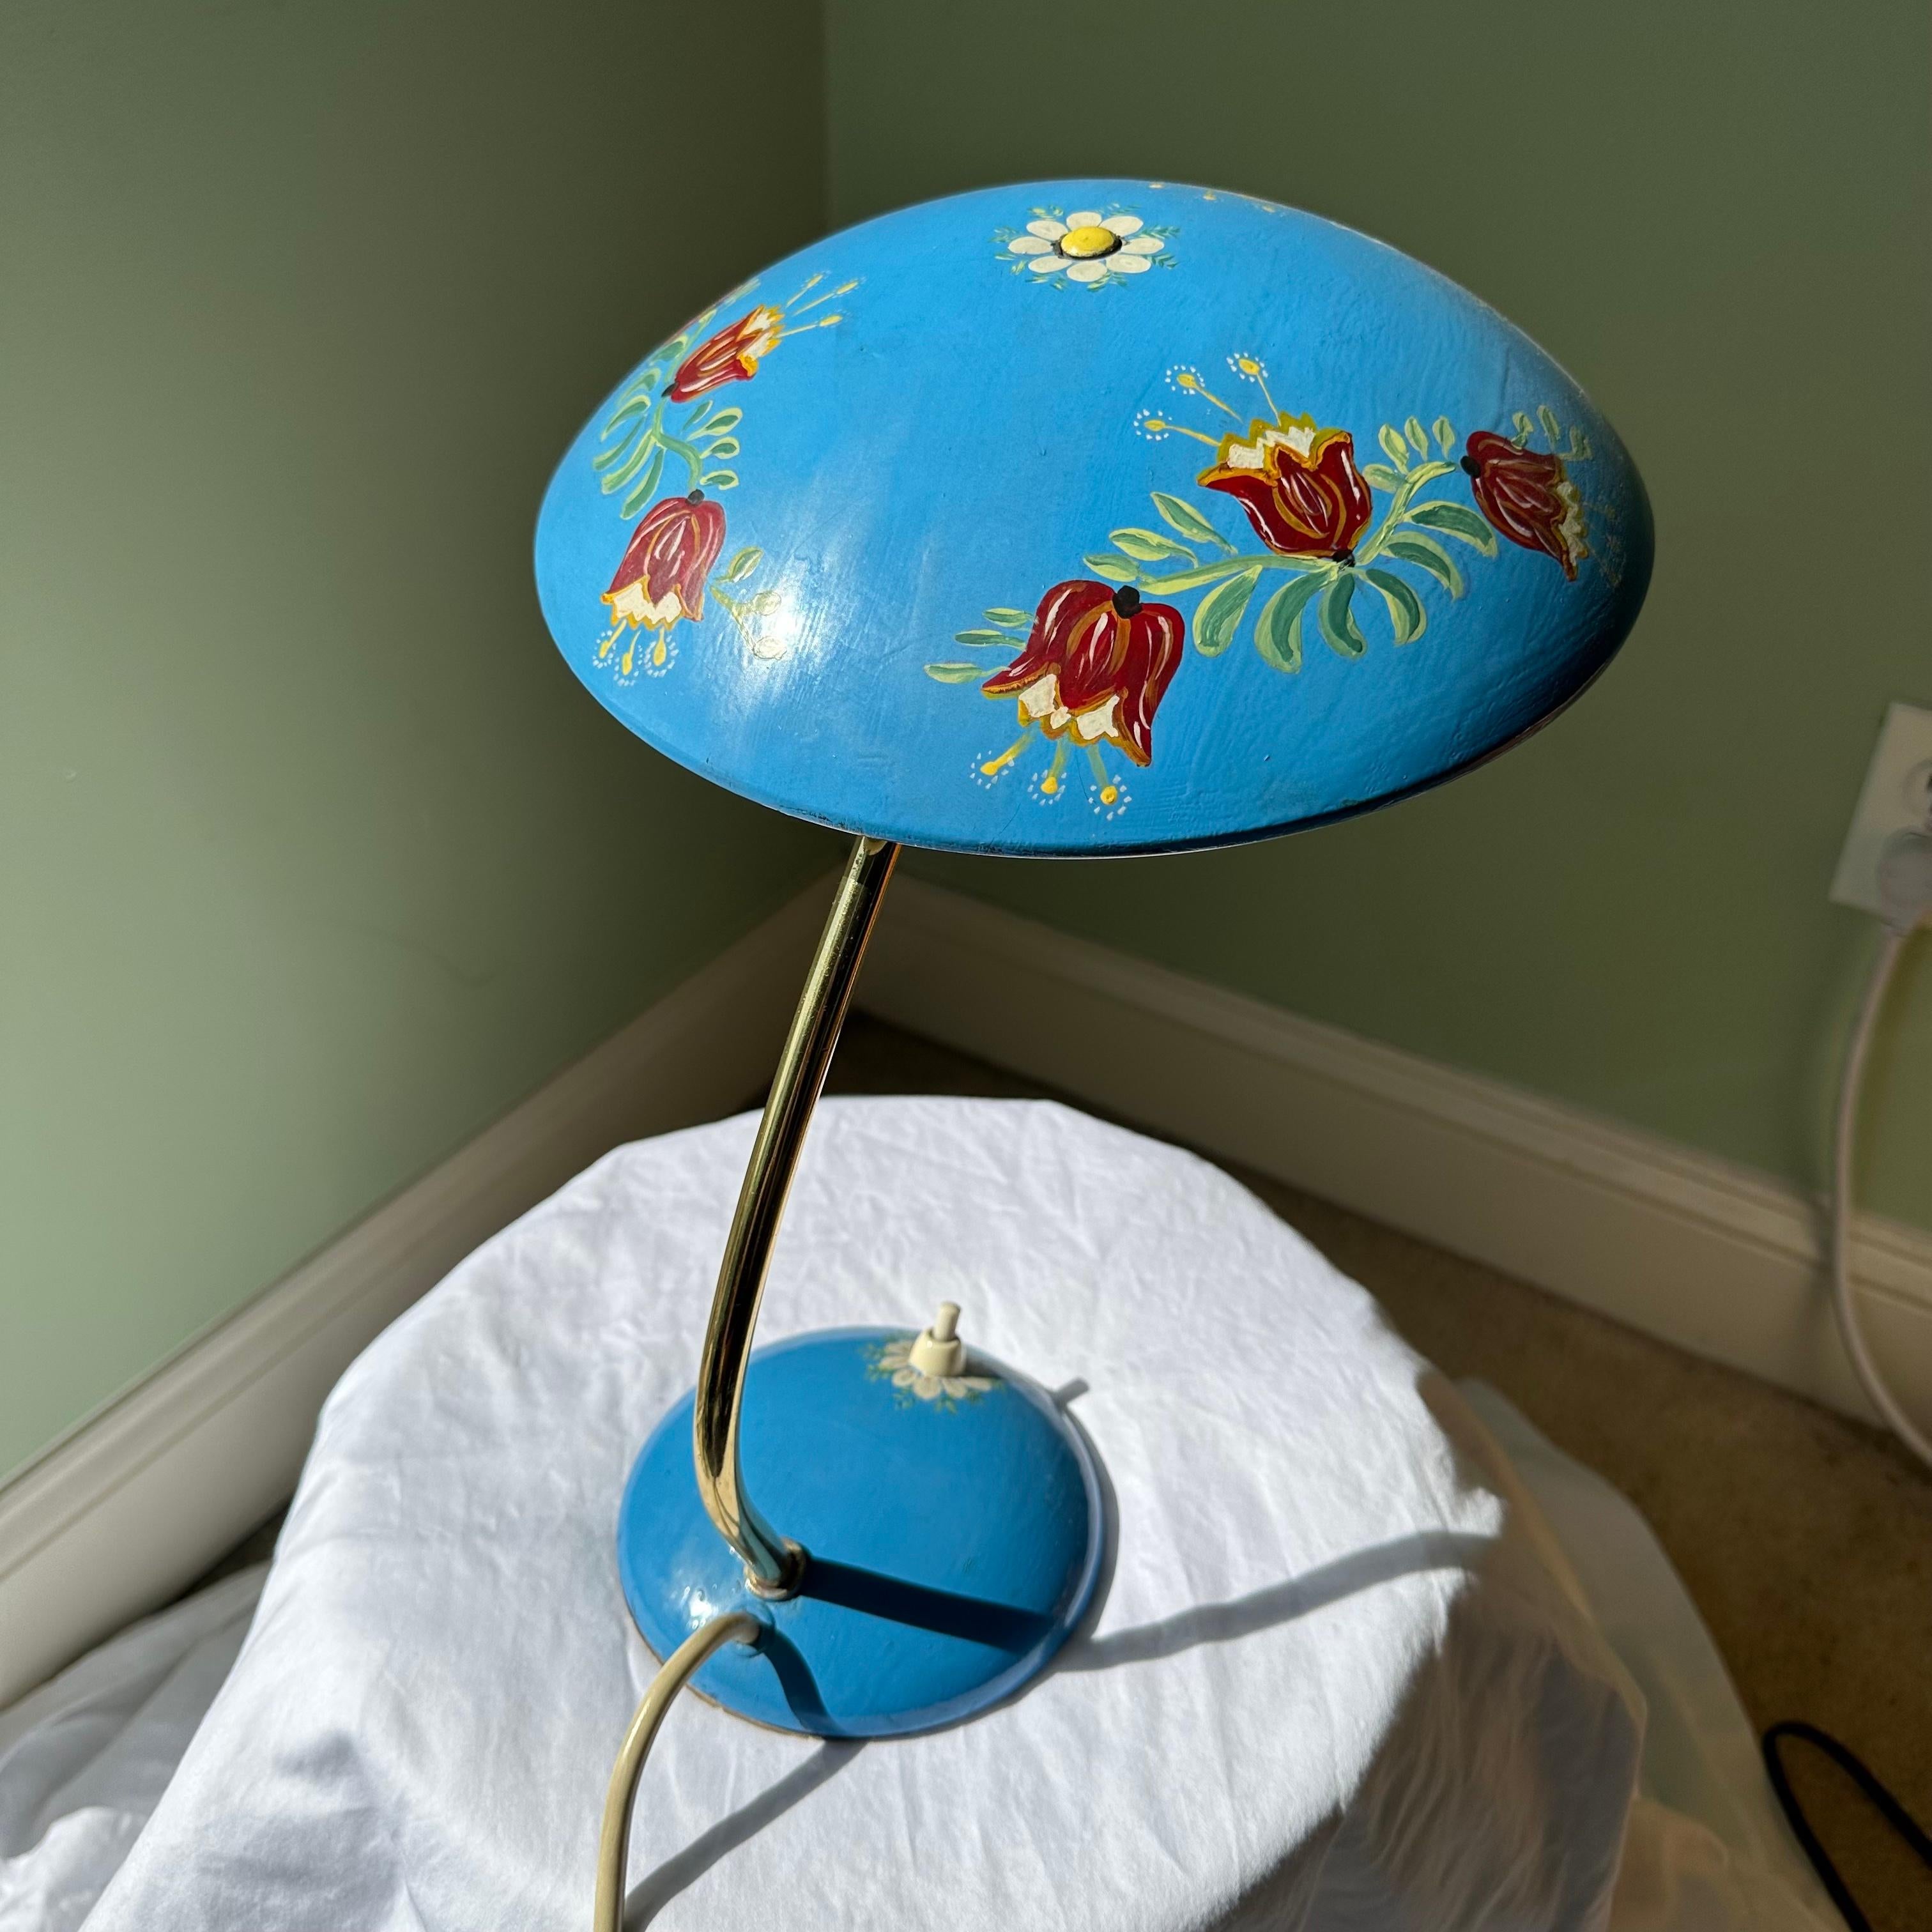 Absolutely darling and one of a kind vintage mid century table lamp or desk lamp with hand painted floral details. A unique, hand painted, folk art version of the Christian Dell for Kaiser Idell Model 6782 lamp. Satin brass metal with saucer pr UFO